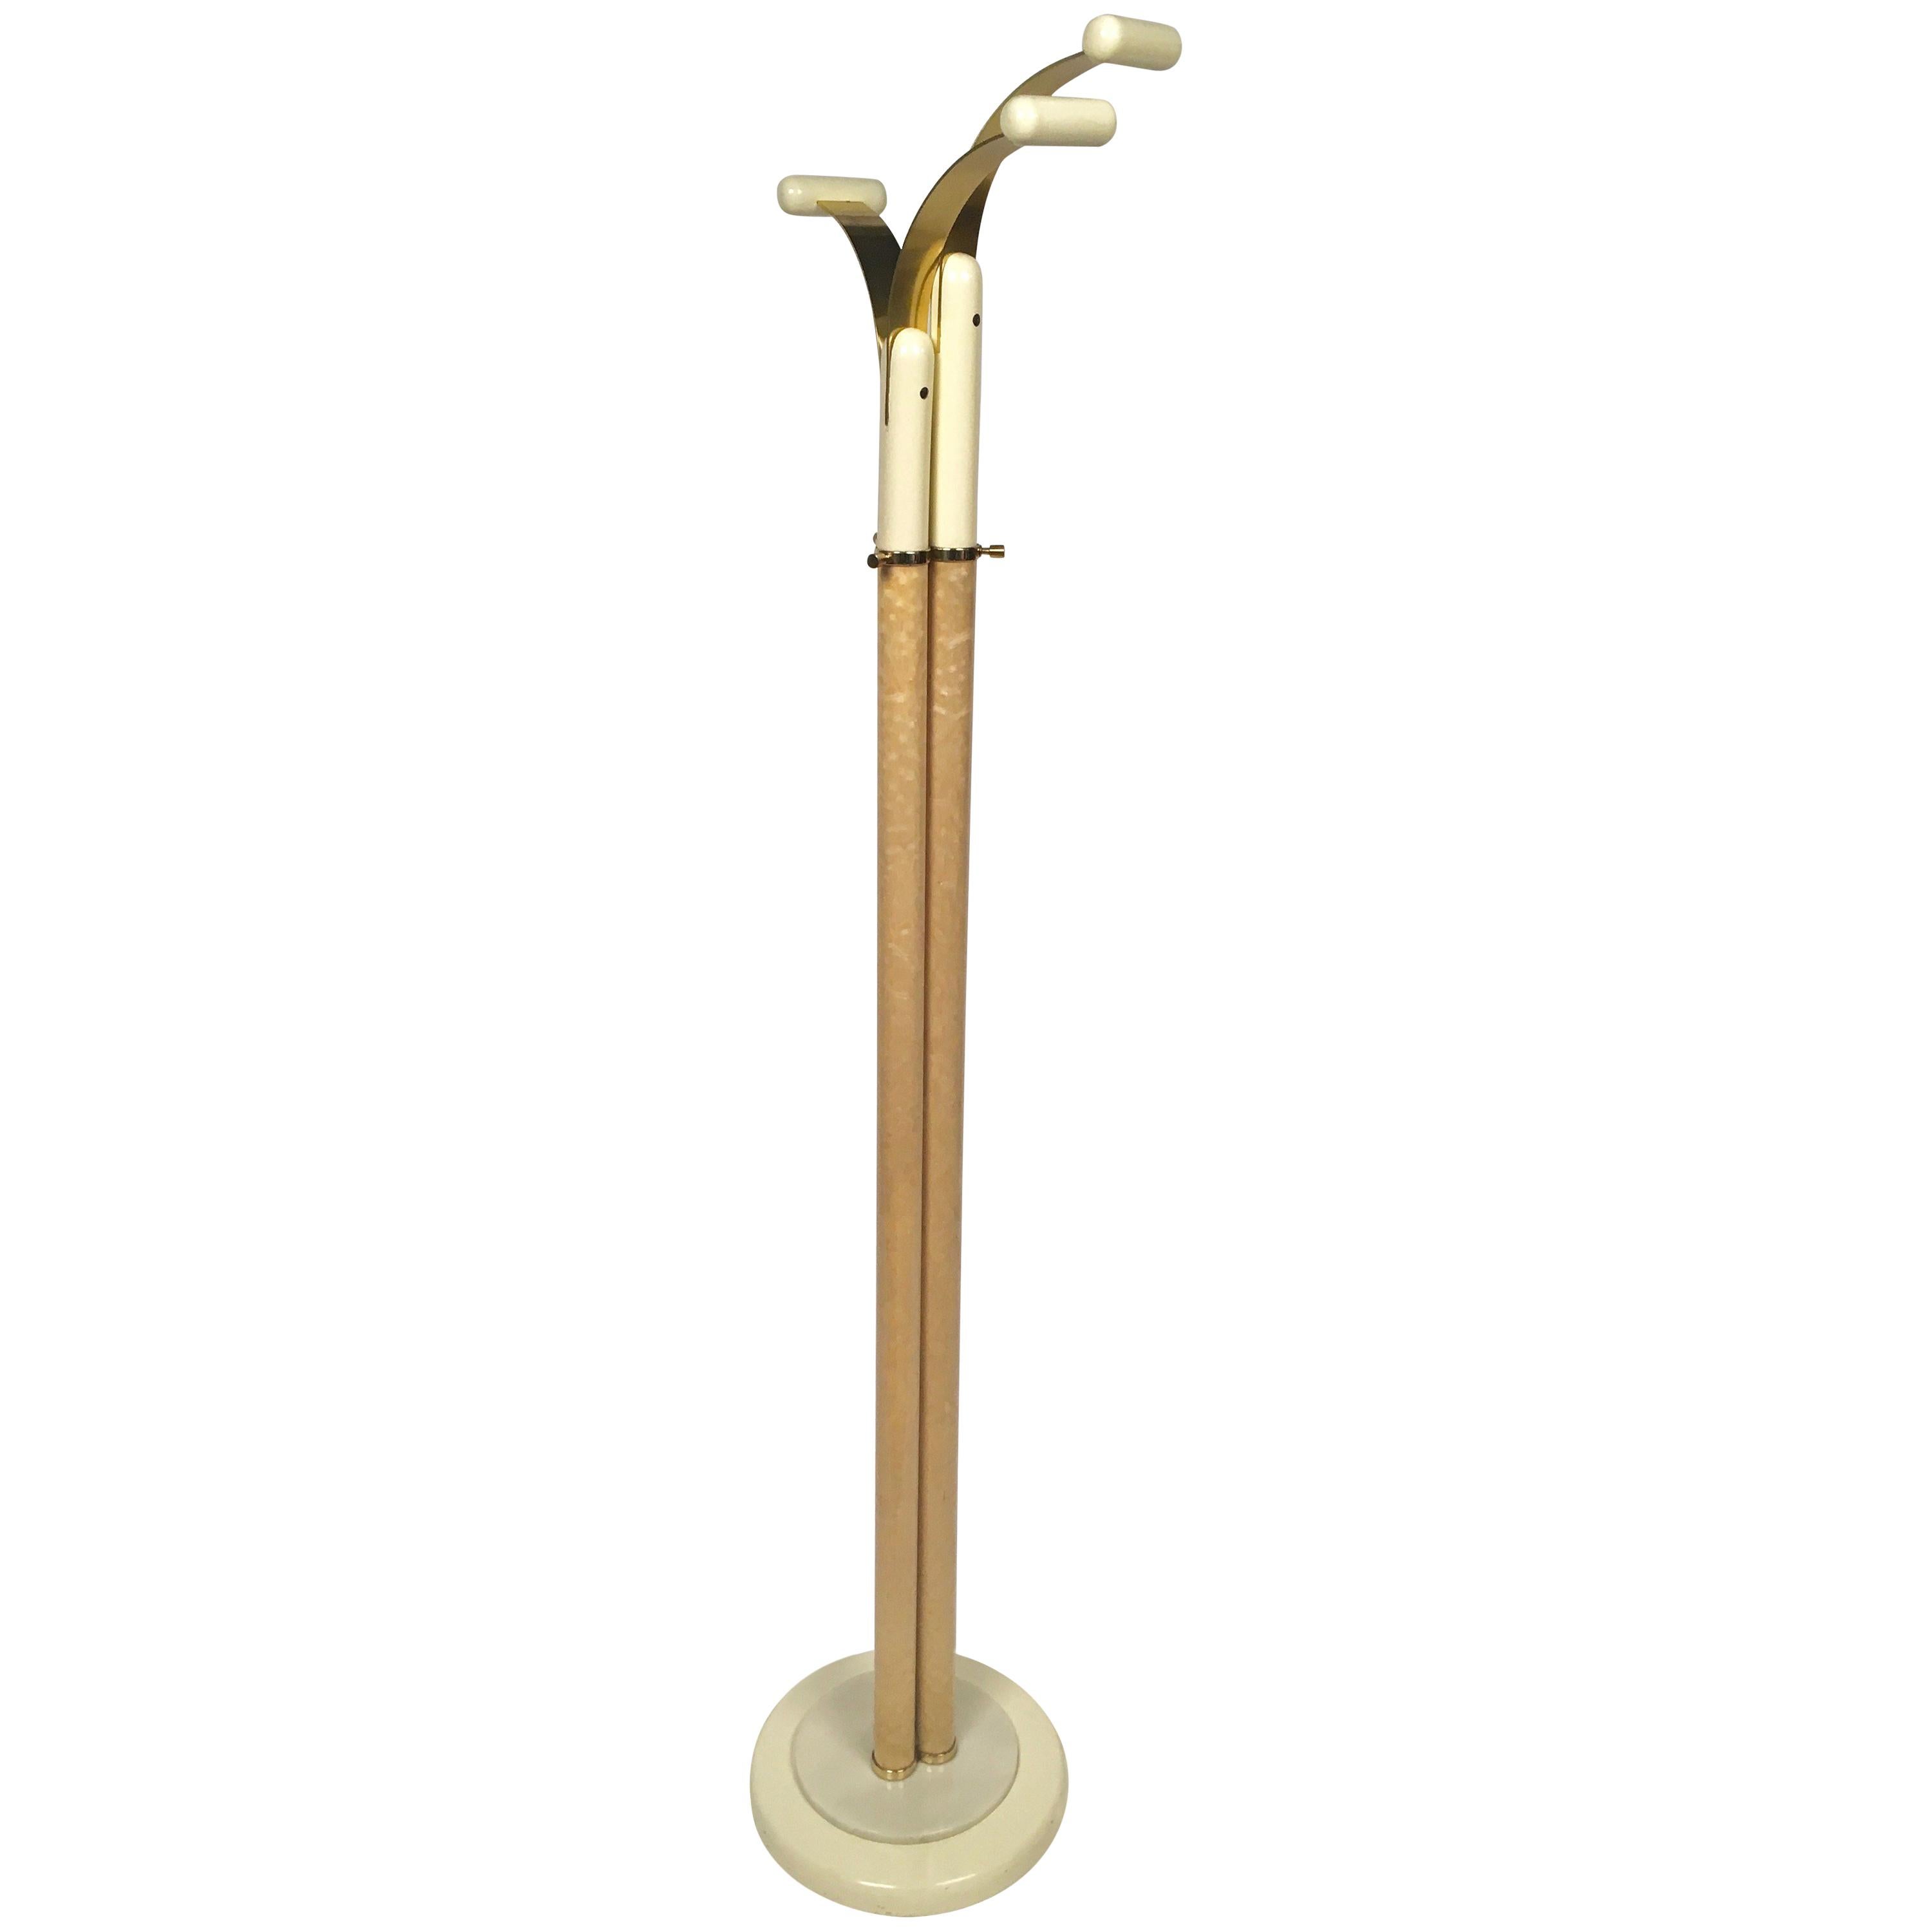 Italian Mid-Century Modern Coat Racks Stands in Brass and Lacquered Wood